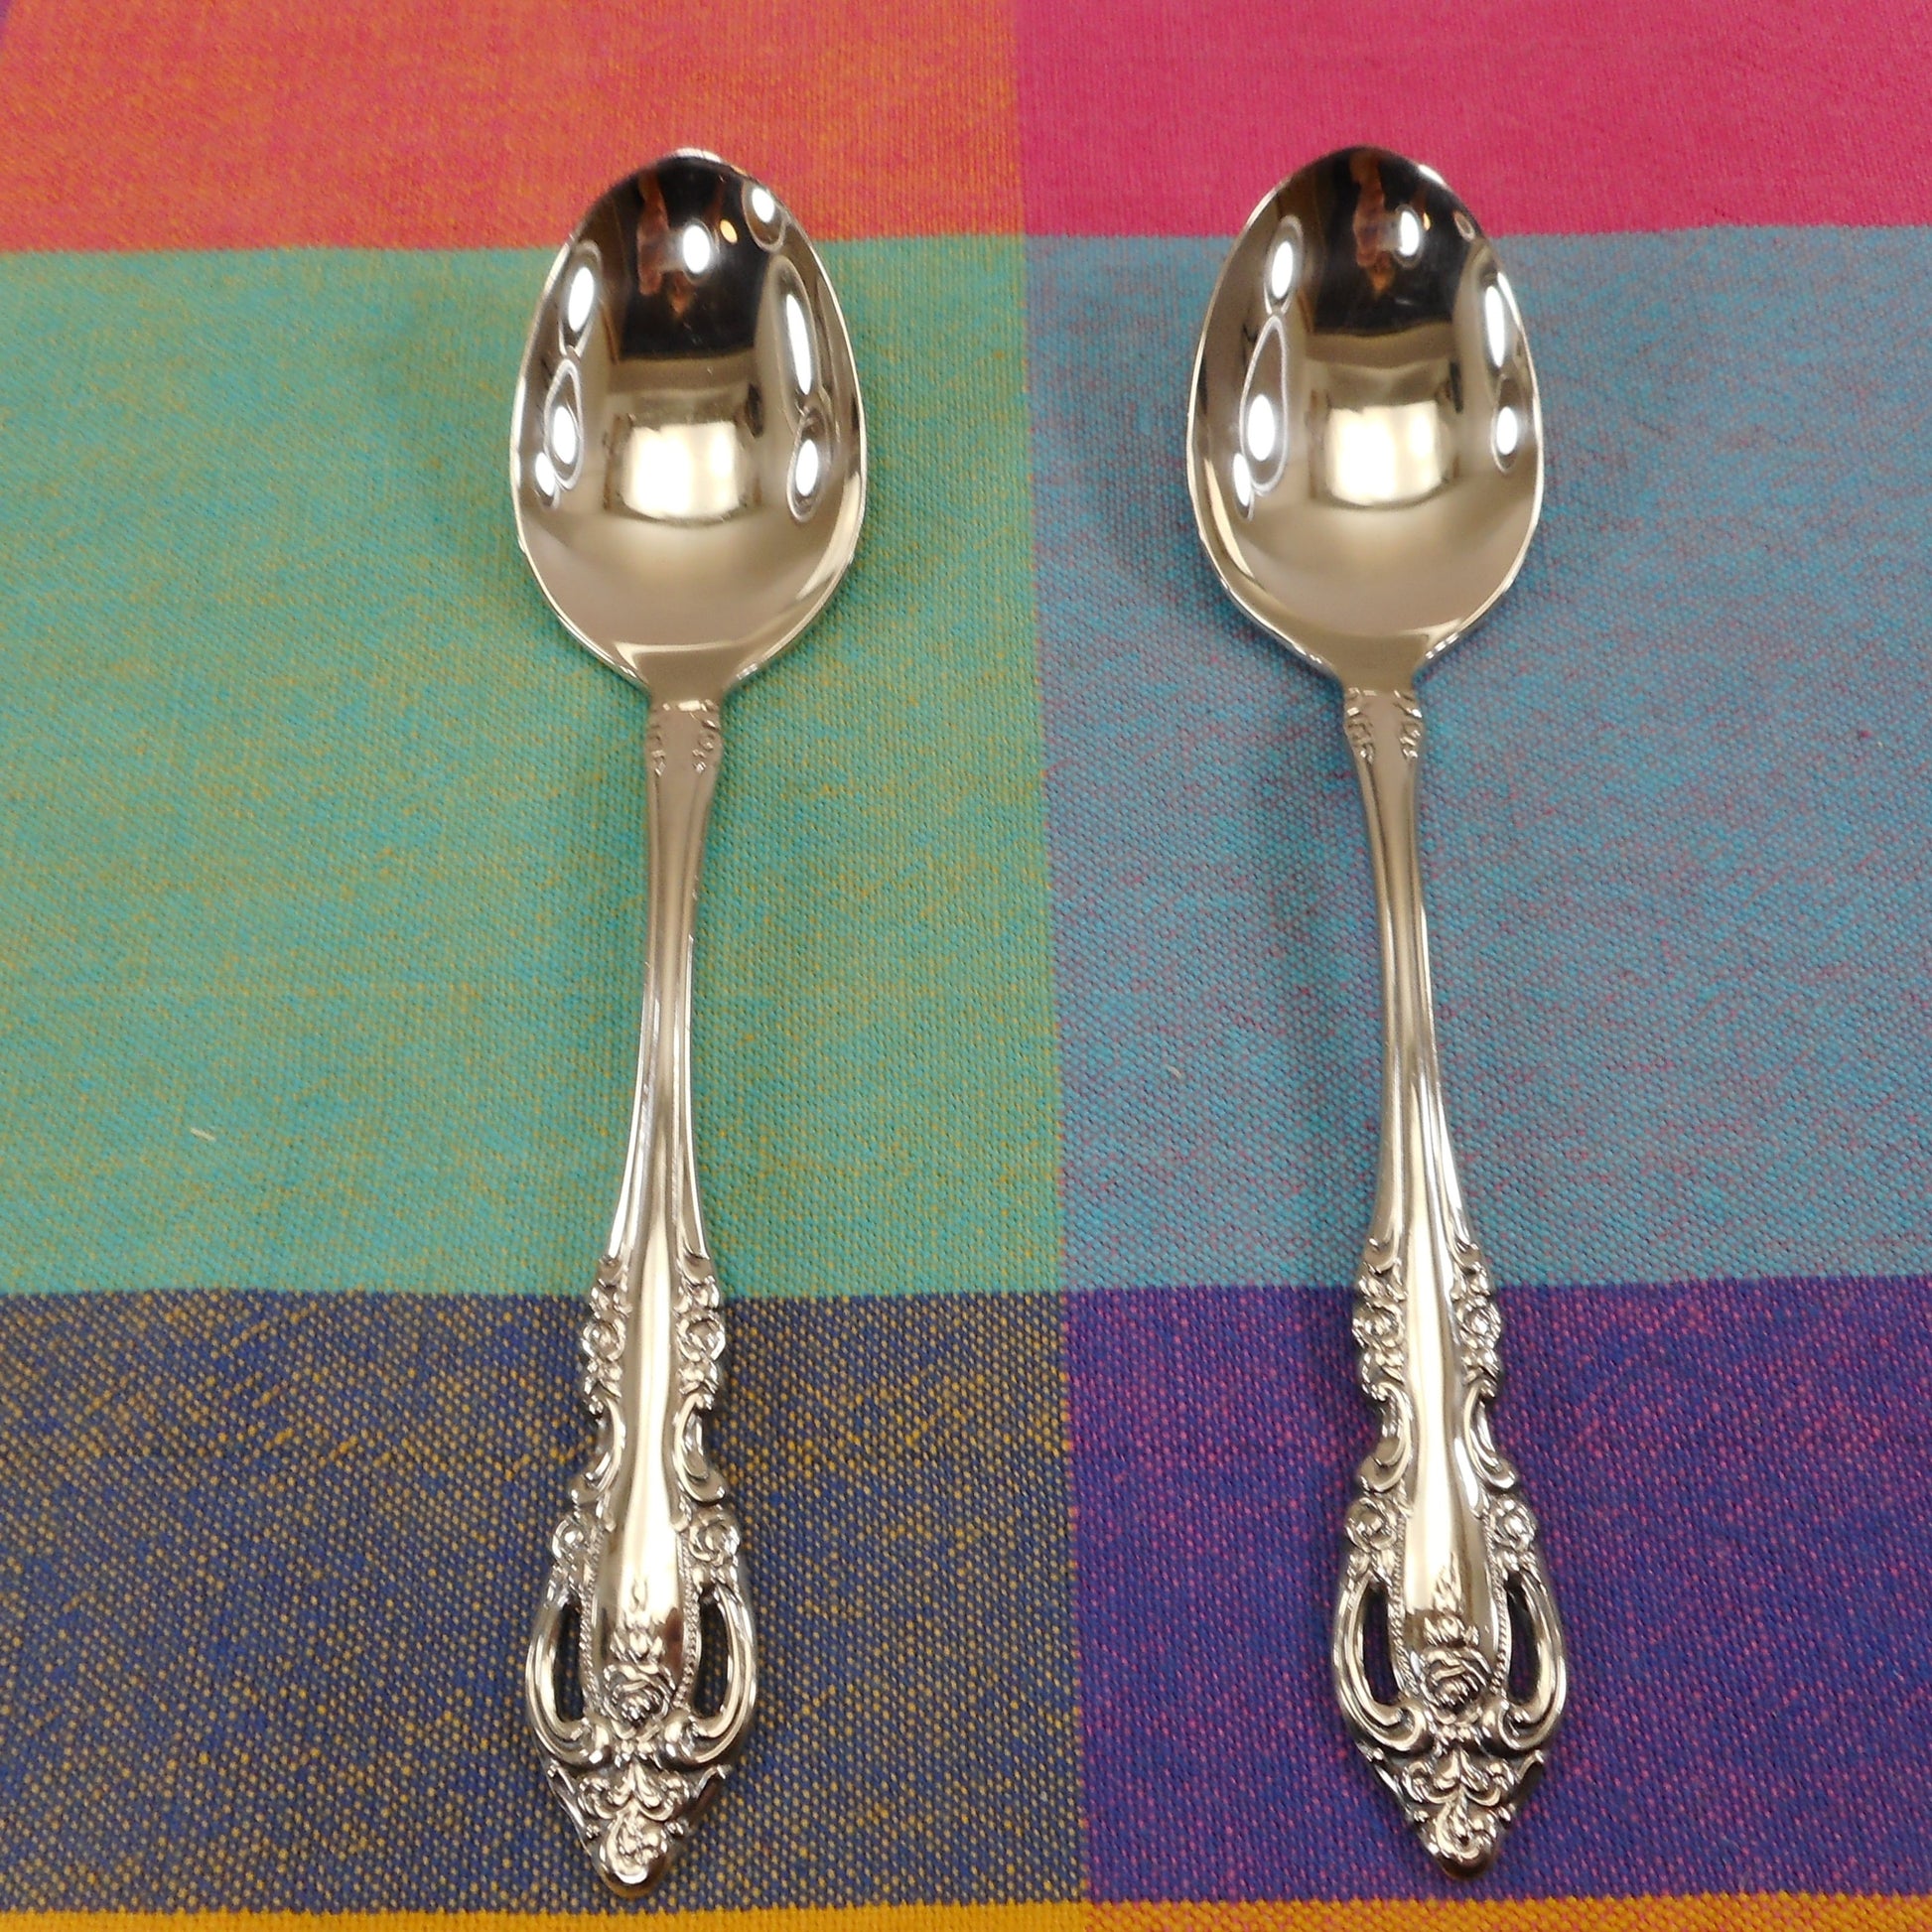 Oneida Community Brahms Stainless Flatware - 2 Place Spoons